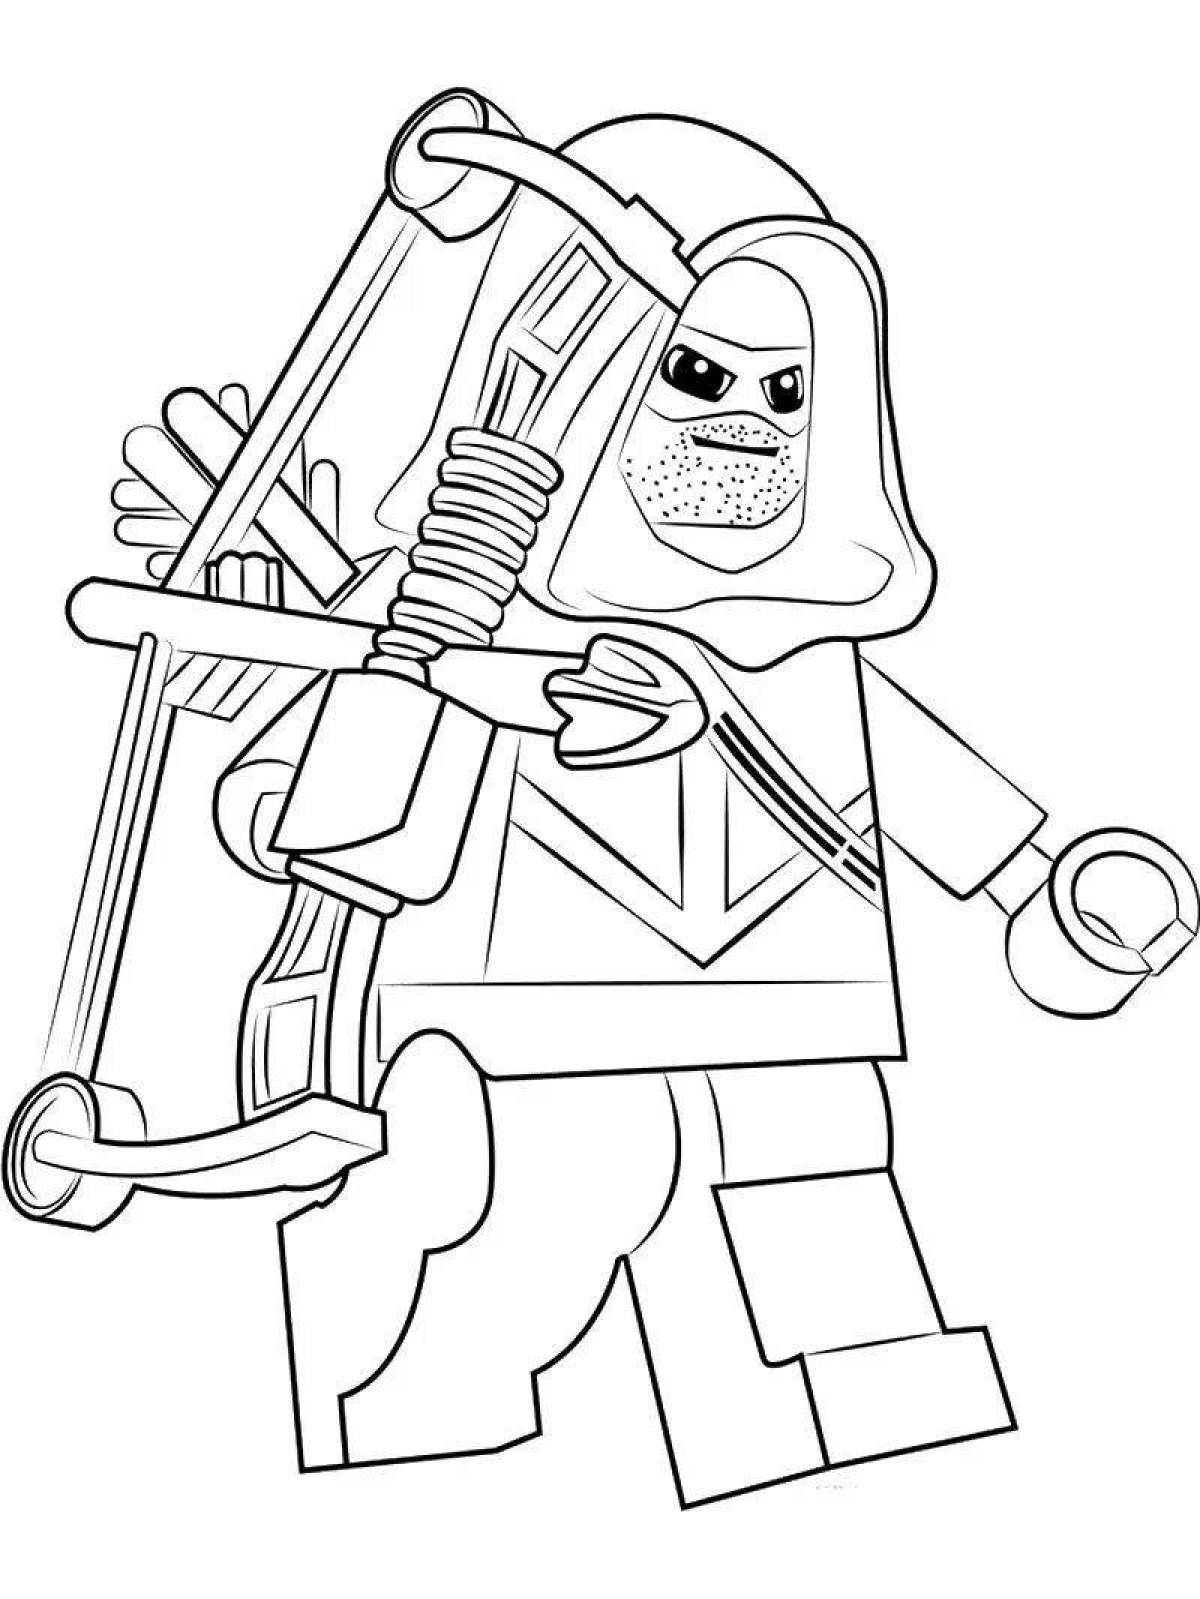 Playful lego zombie coloring page